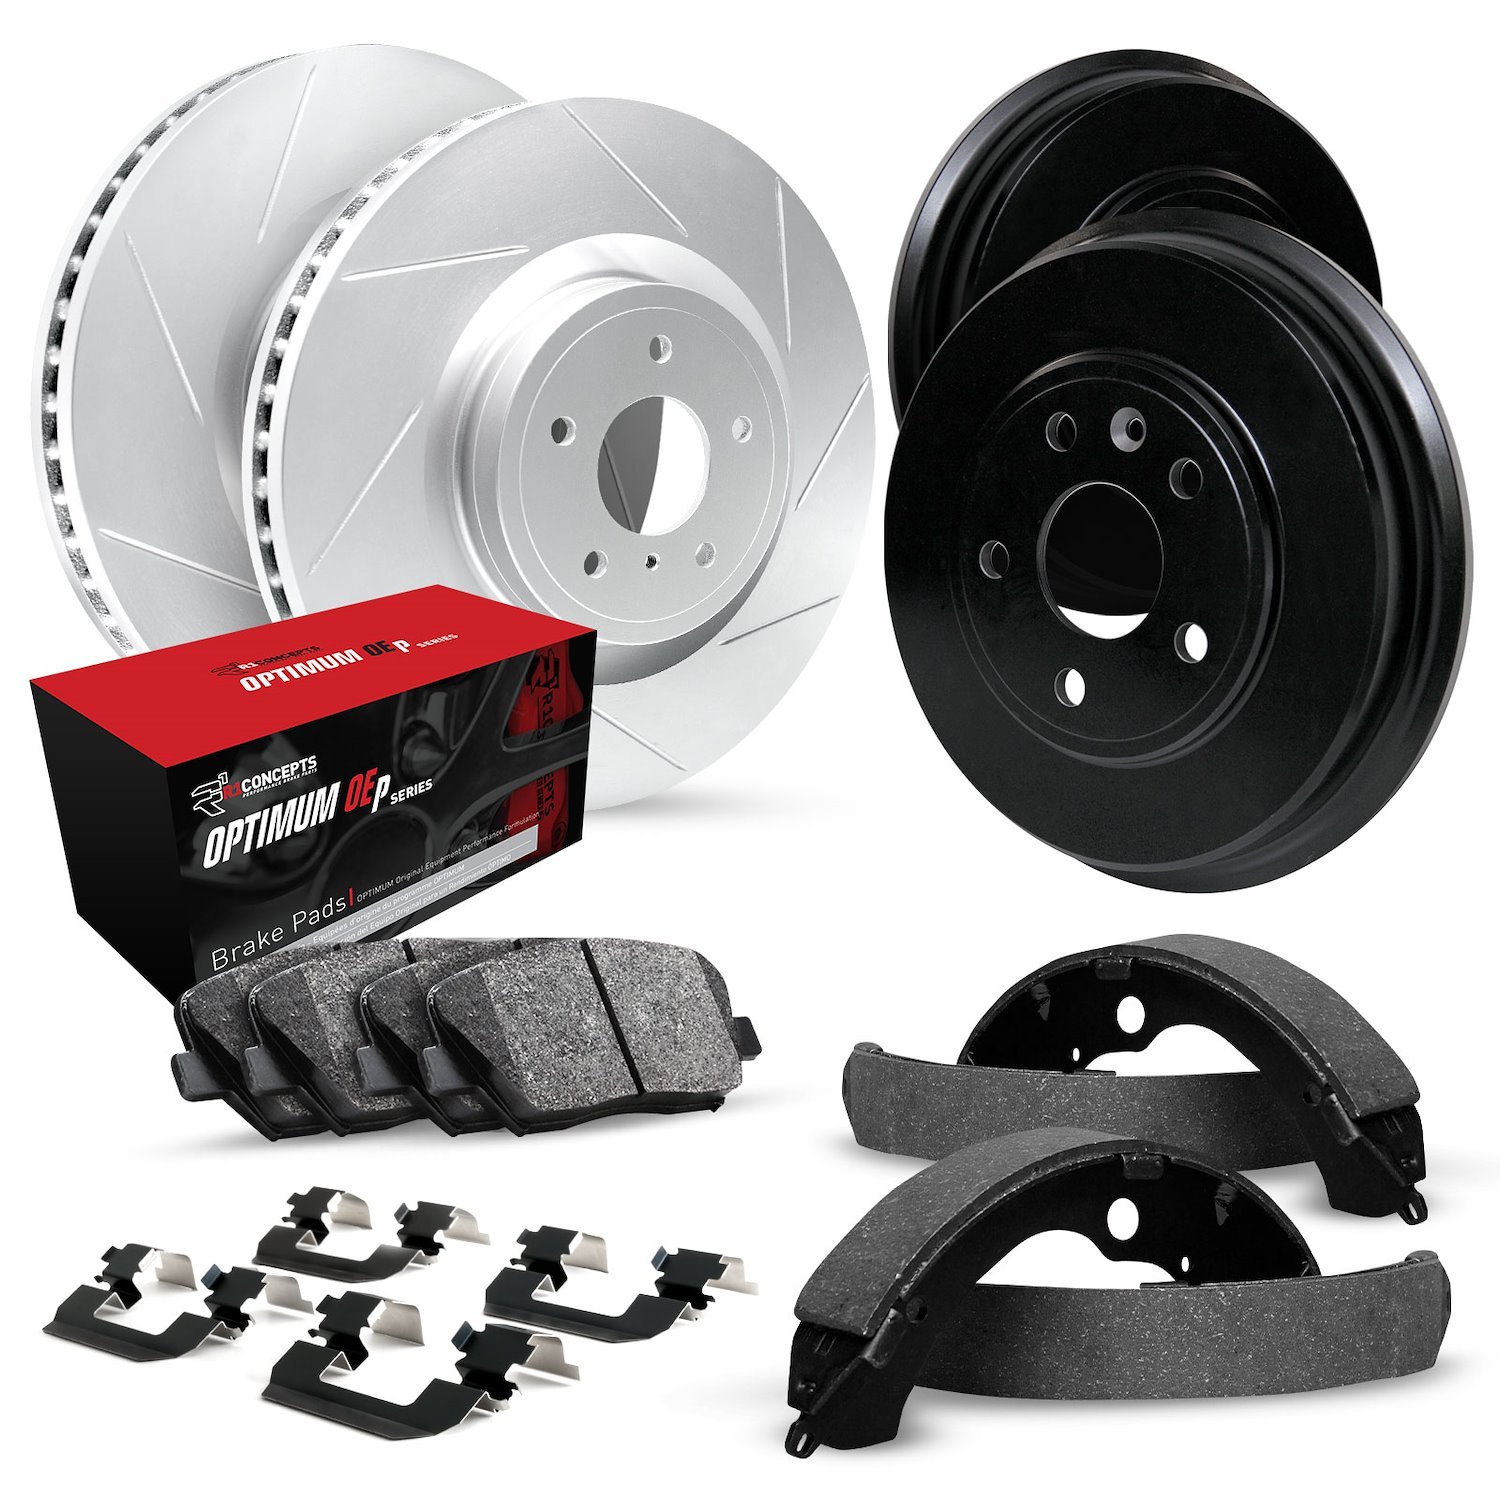 GEO-Carbon Slotted Brake Rotor & Drum Set w/Optimum OE Pads, Shoes, & Hardware, 2000-2003 GM, Position: Front & Rear